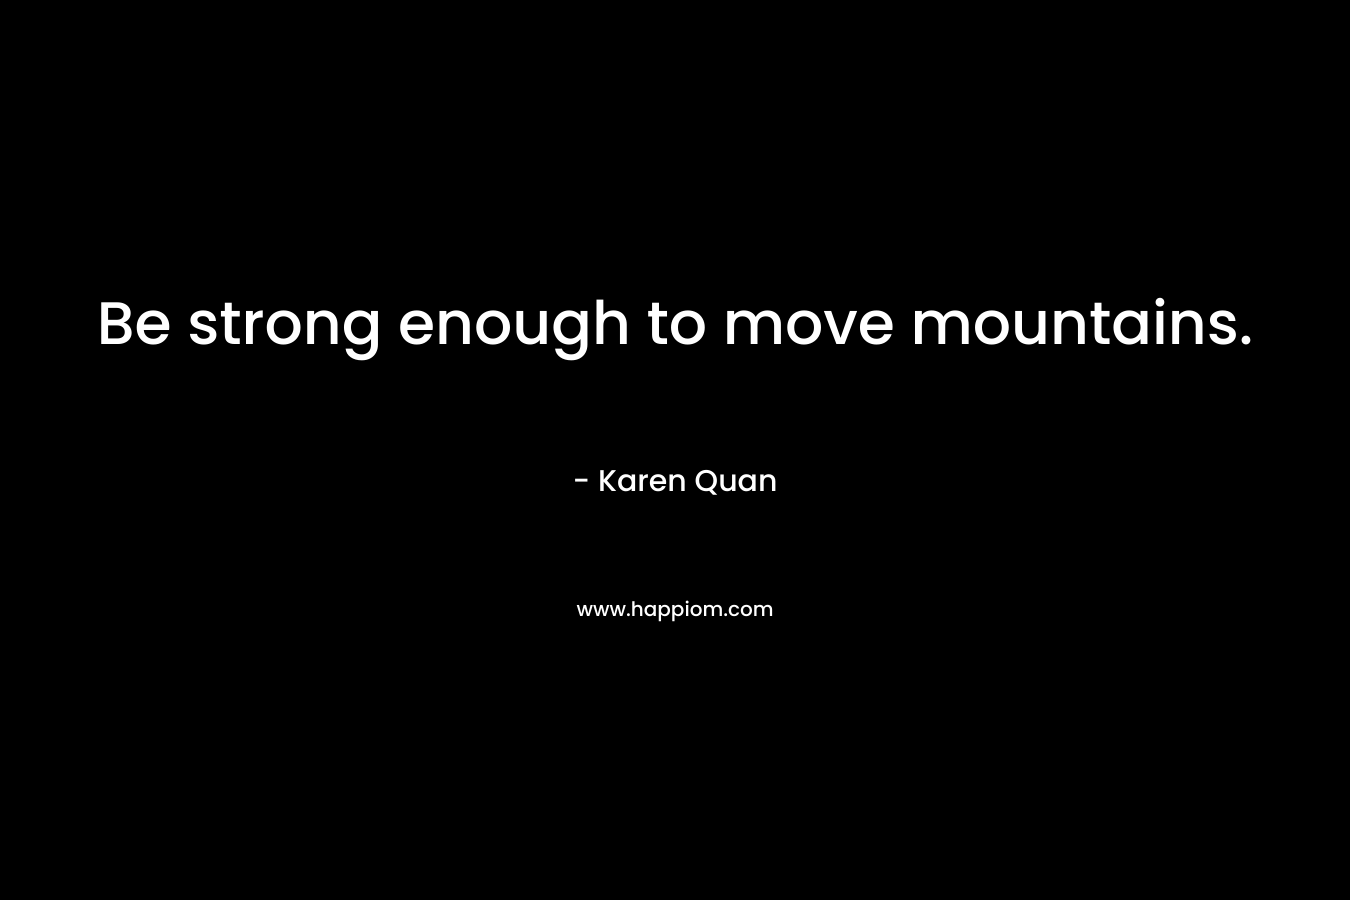 Be strong enough to move mountains.